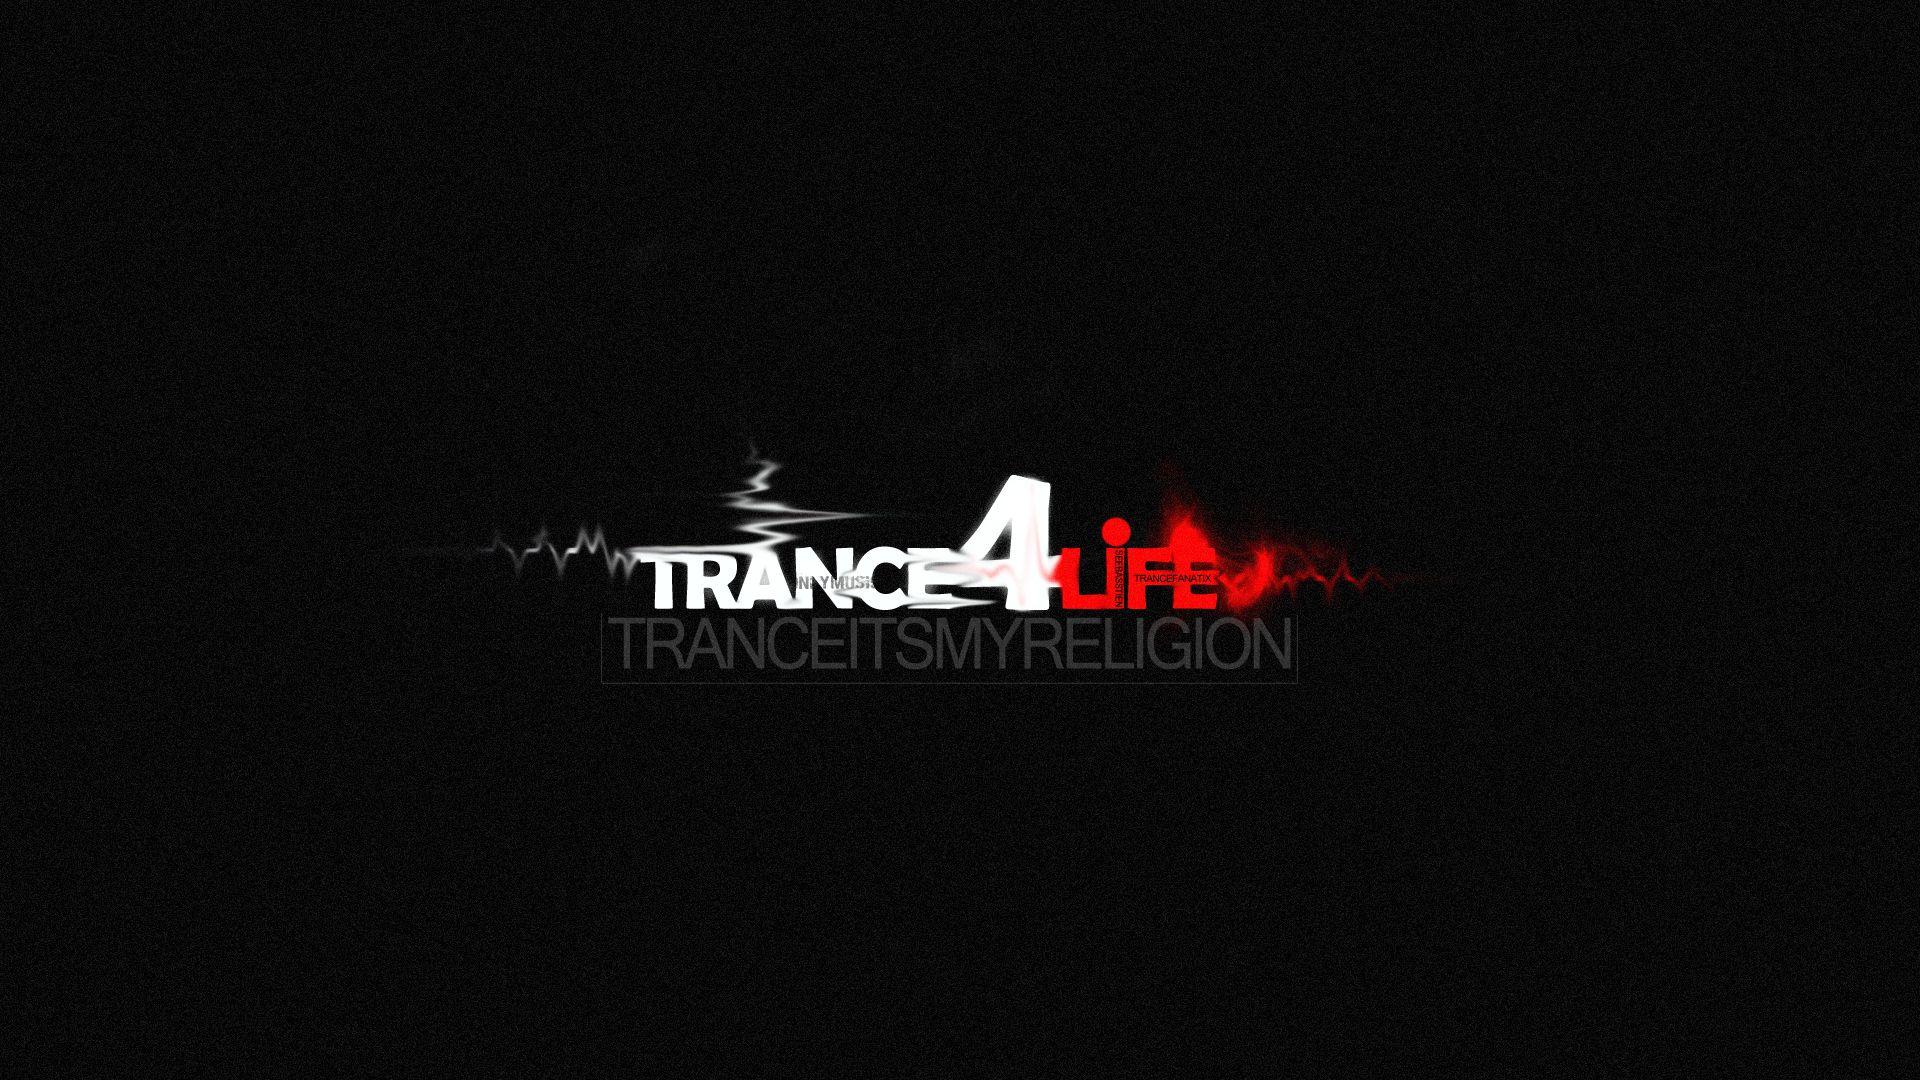 Trance Full HD Wallpapers and Backgrounds Image